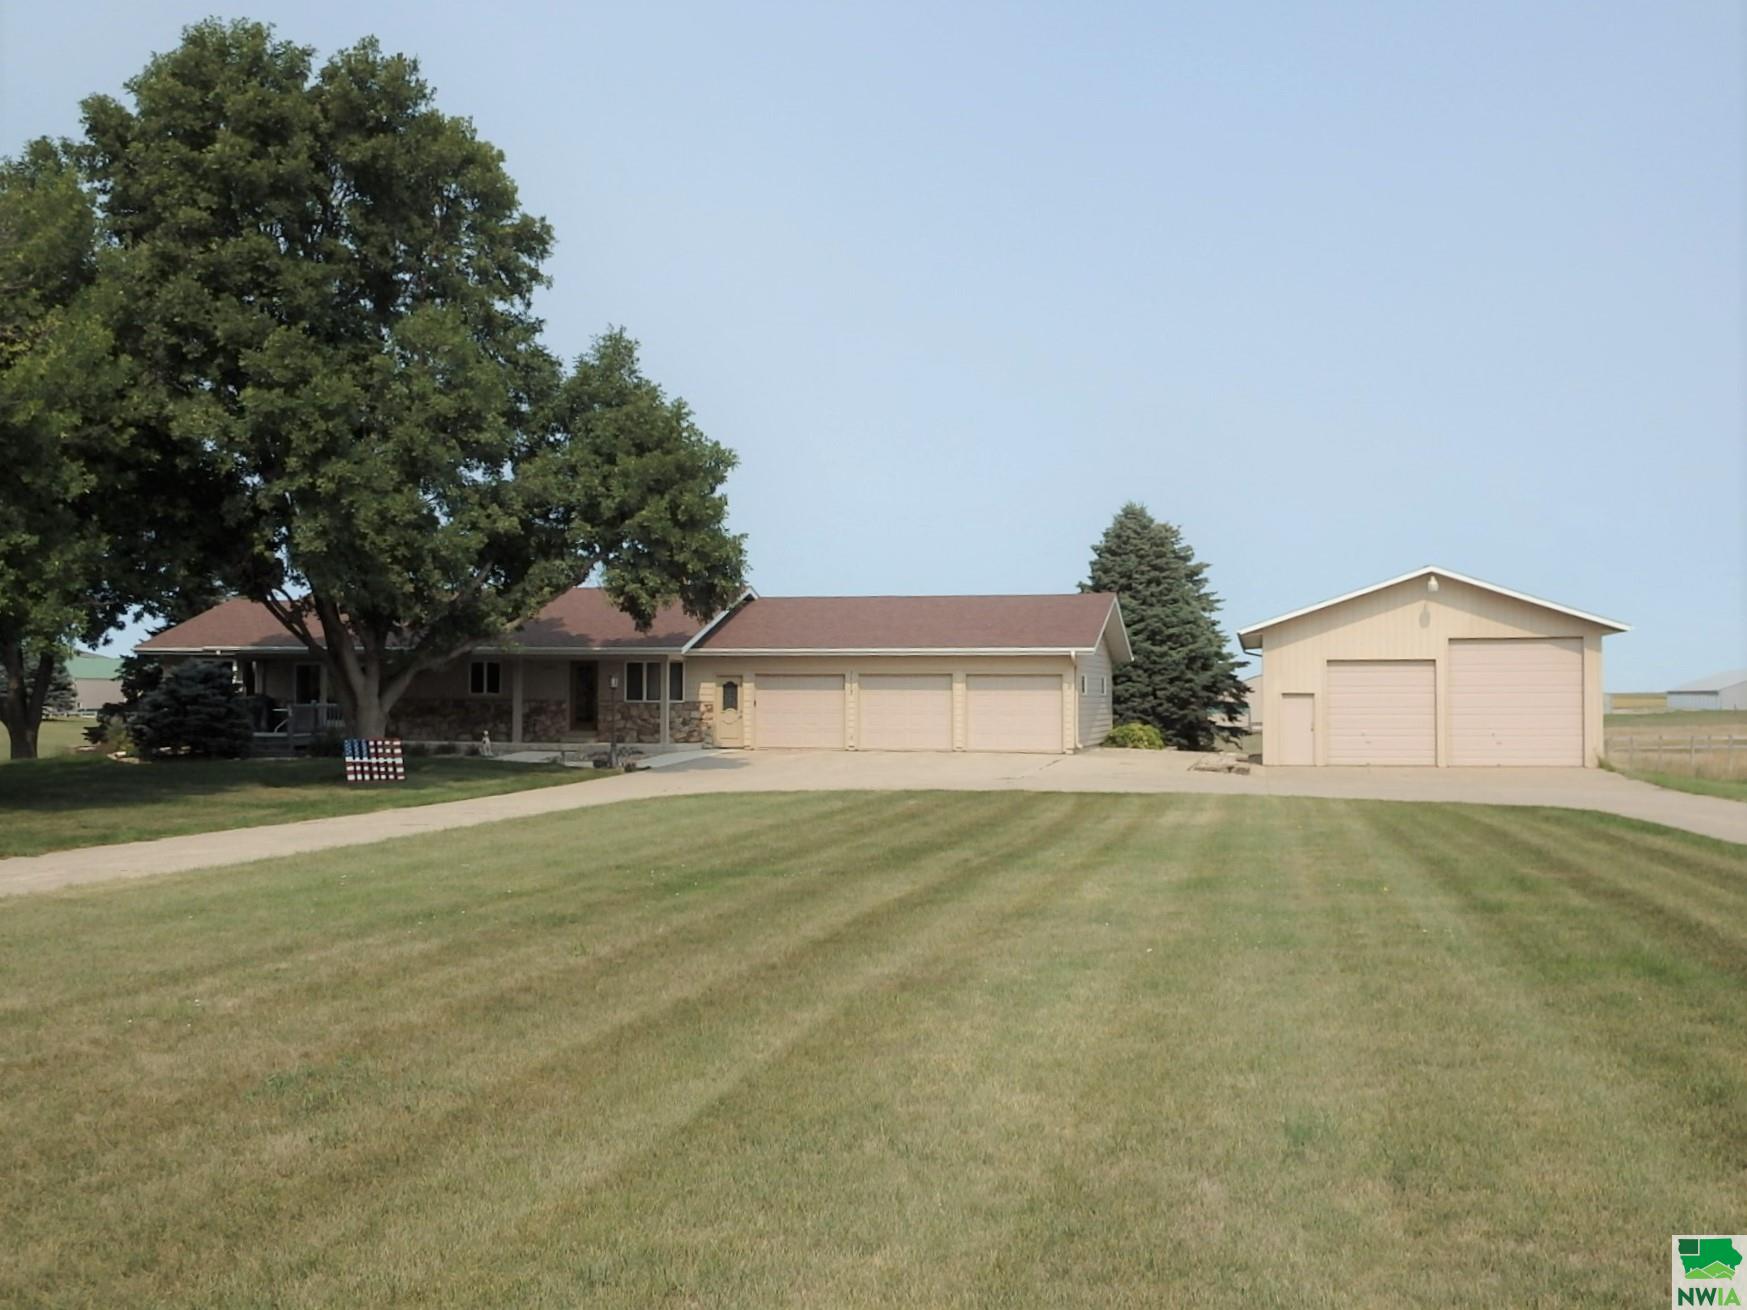 1132 4th Street NW						  						 , Sioux Center						 , IA						  51250						  